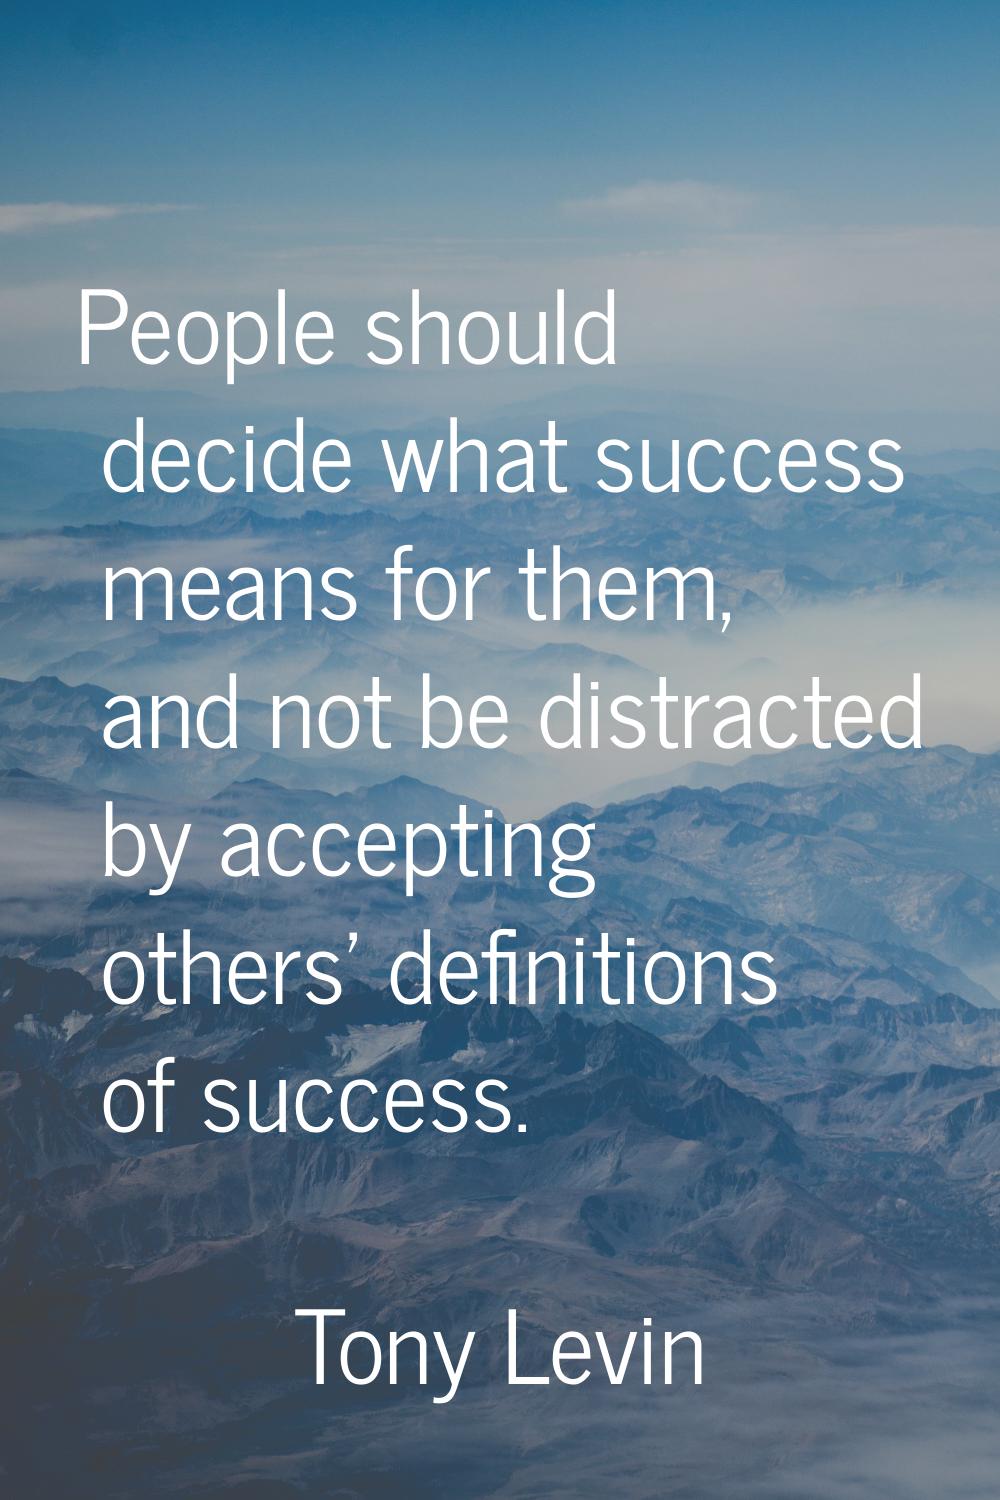 People should decide what success means for them, and not be distracted by accepting others' defini